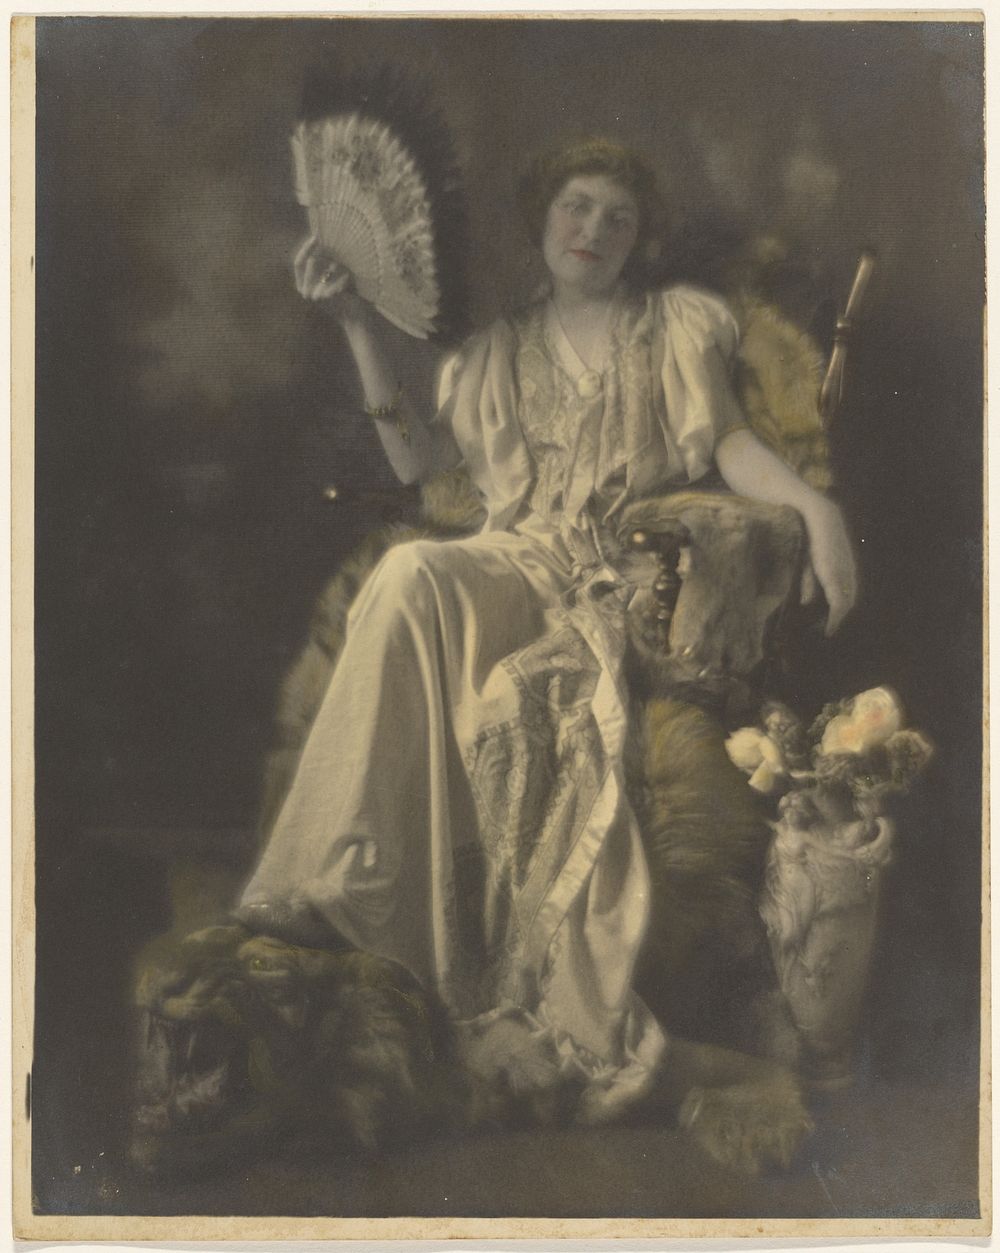 Florence Seated in a Chair with Tiger Rug by Louis Fleckenstein